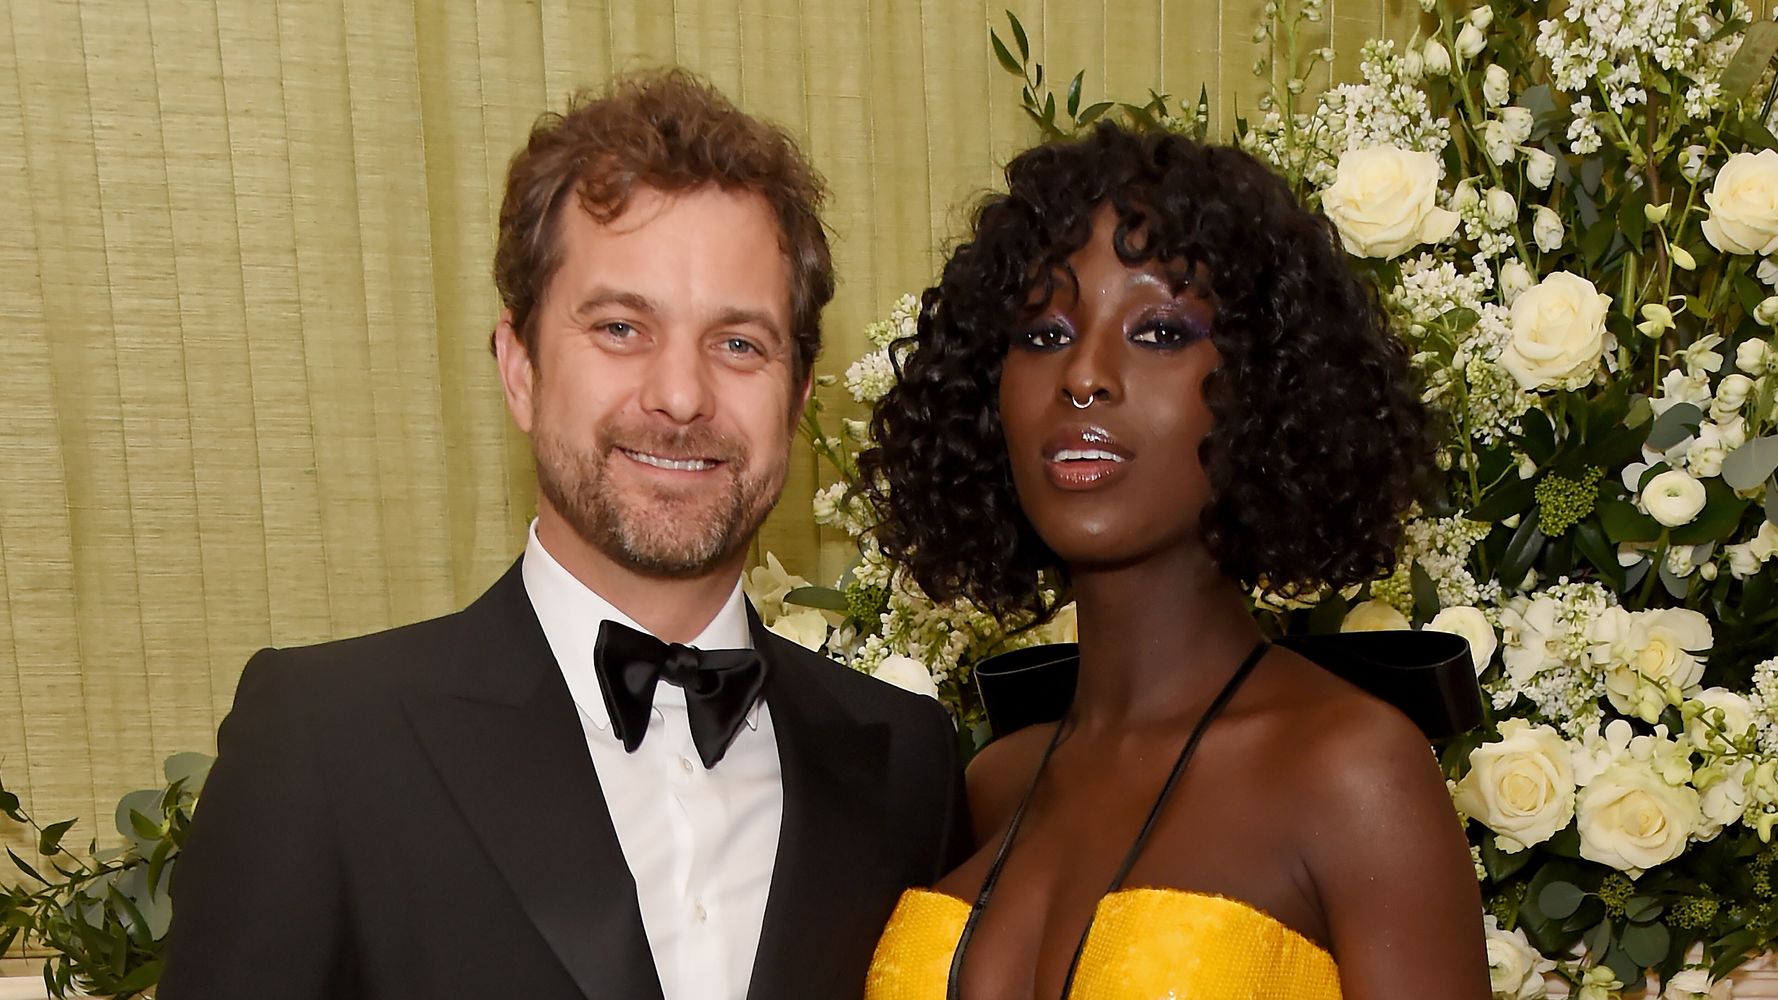 Joshua Jackson Reveals How Wife Jodie Turner-Smith Proposed To Him